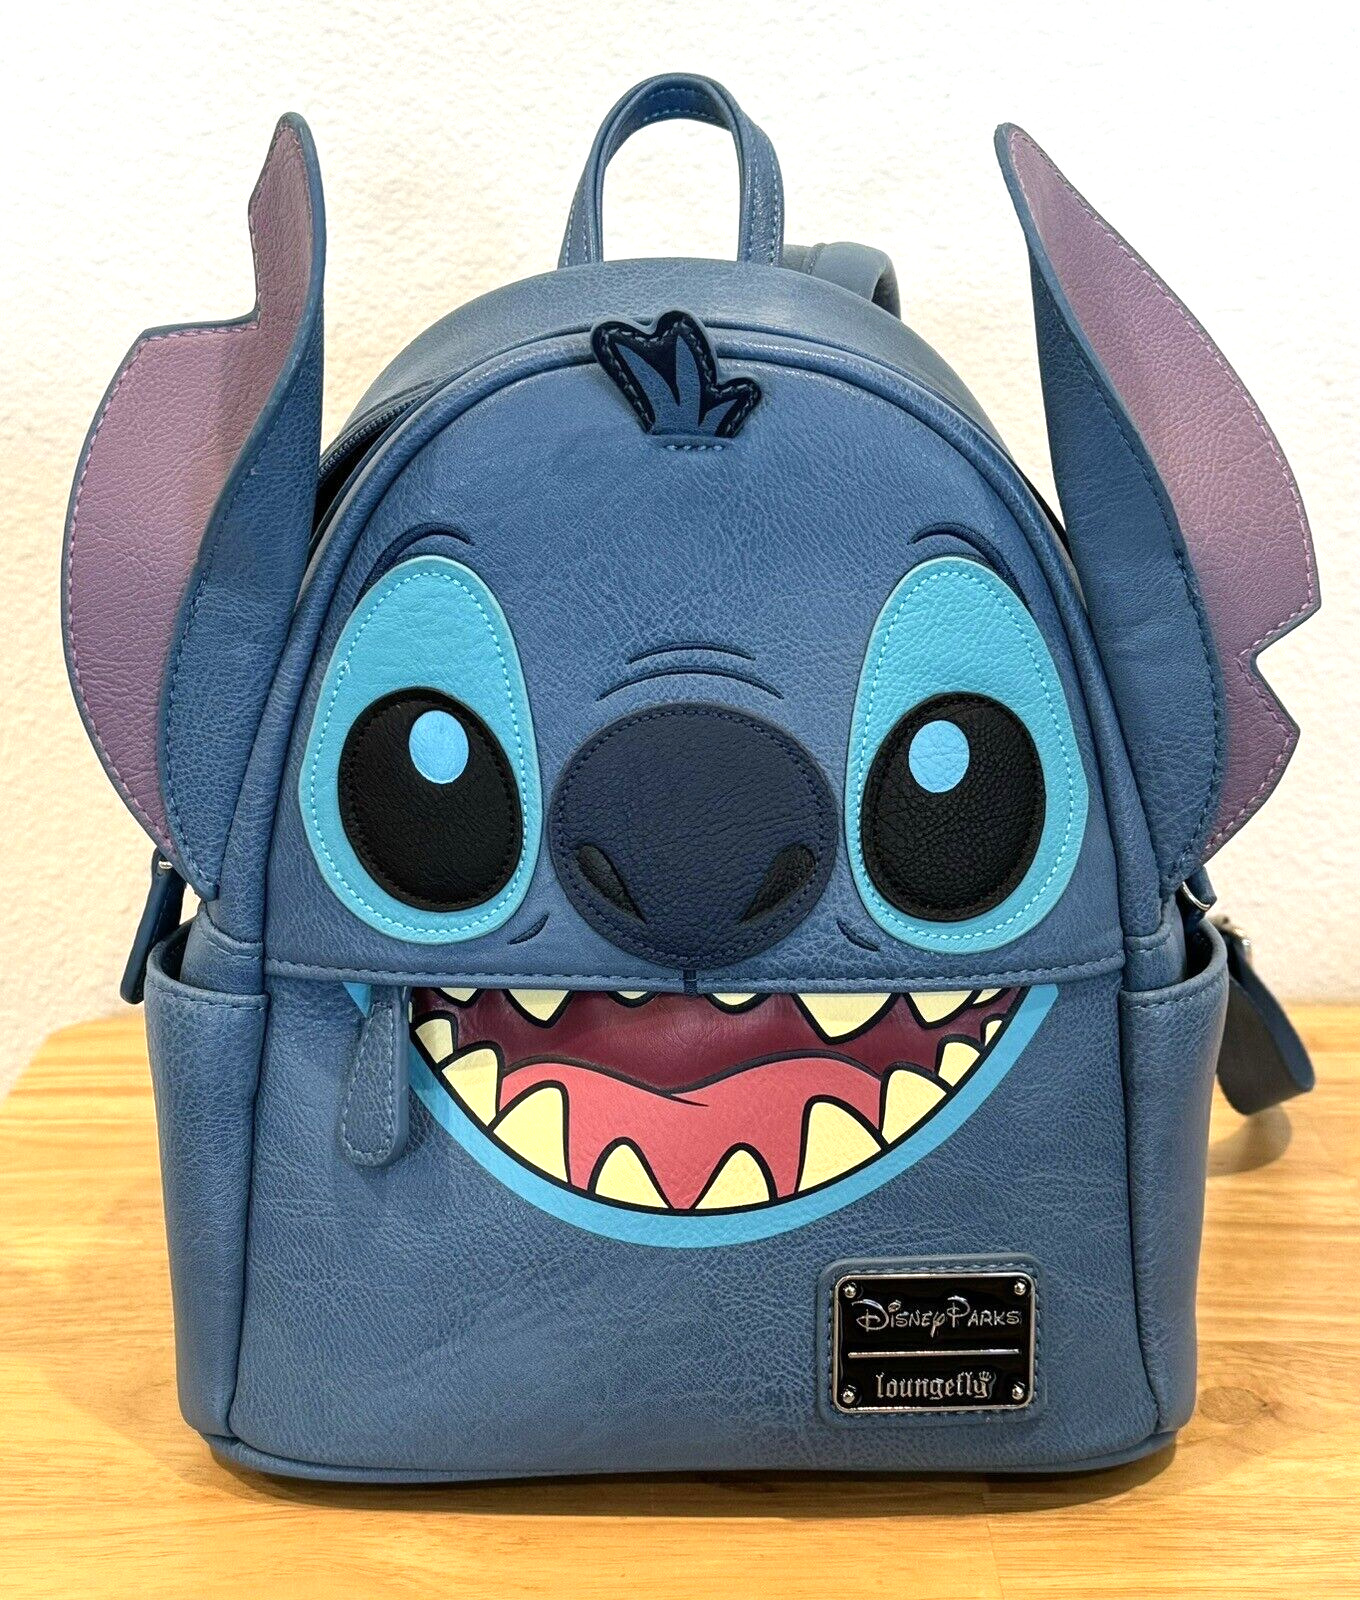 DISNEY PARKS STITCH LOUNGEFLY FAUX LEATHER MINI BLUE BACKPACK - USED